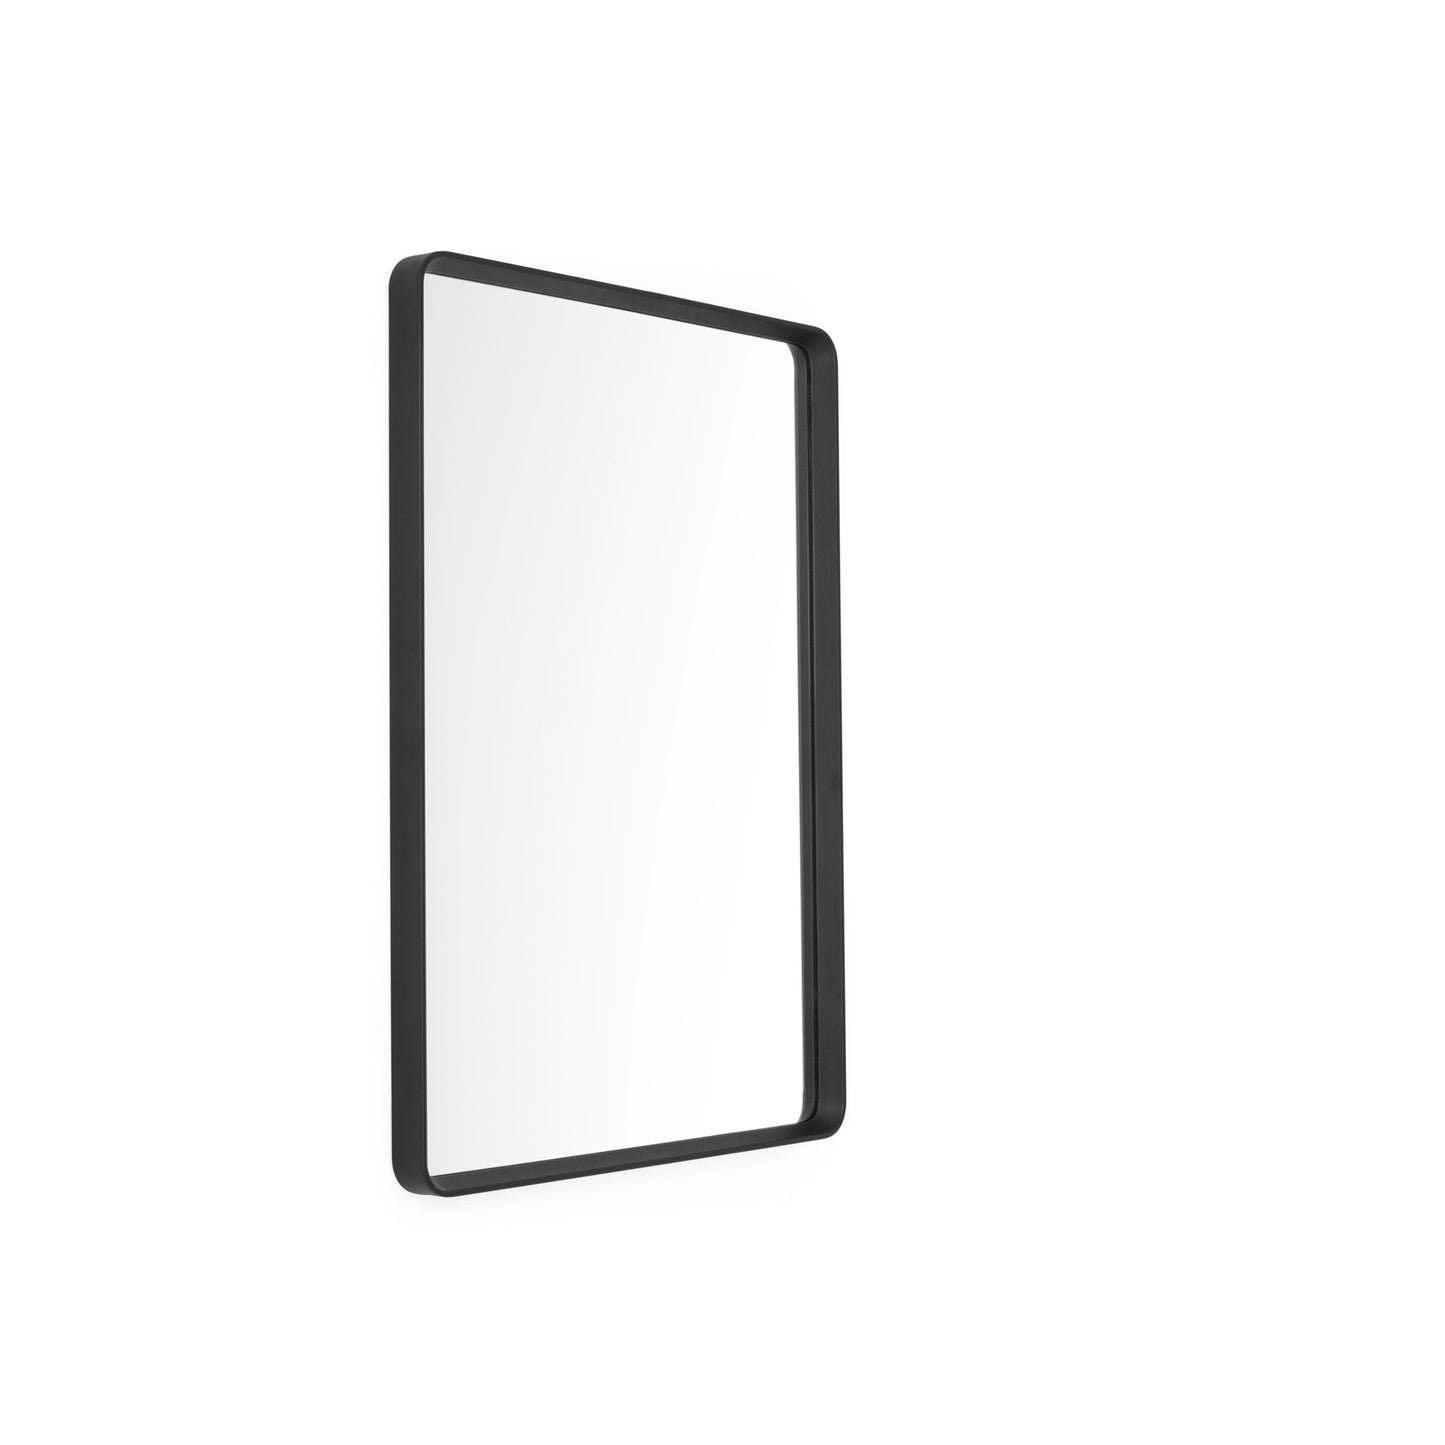 Norm Wall Mirror Rectangular by Audo #Black